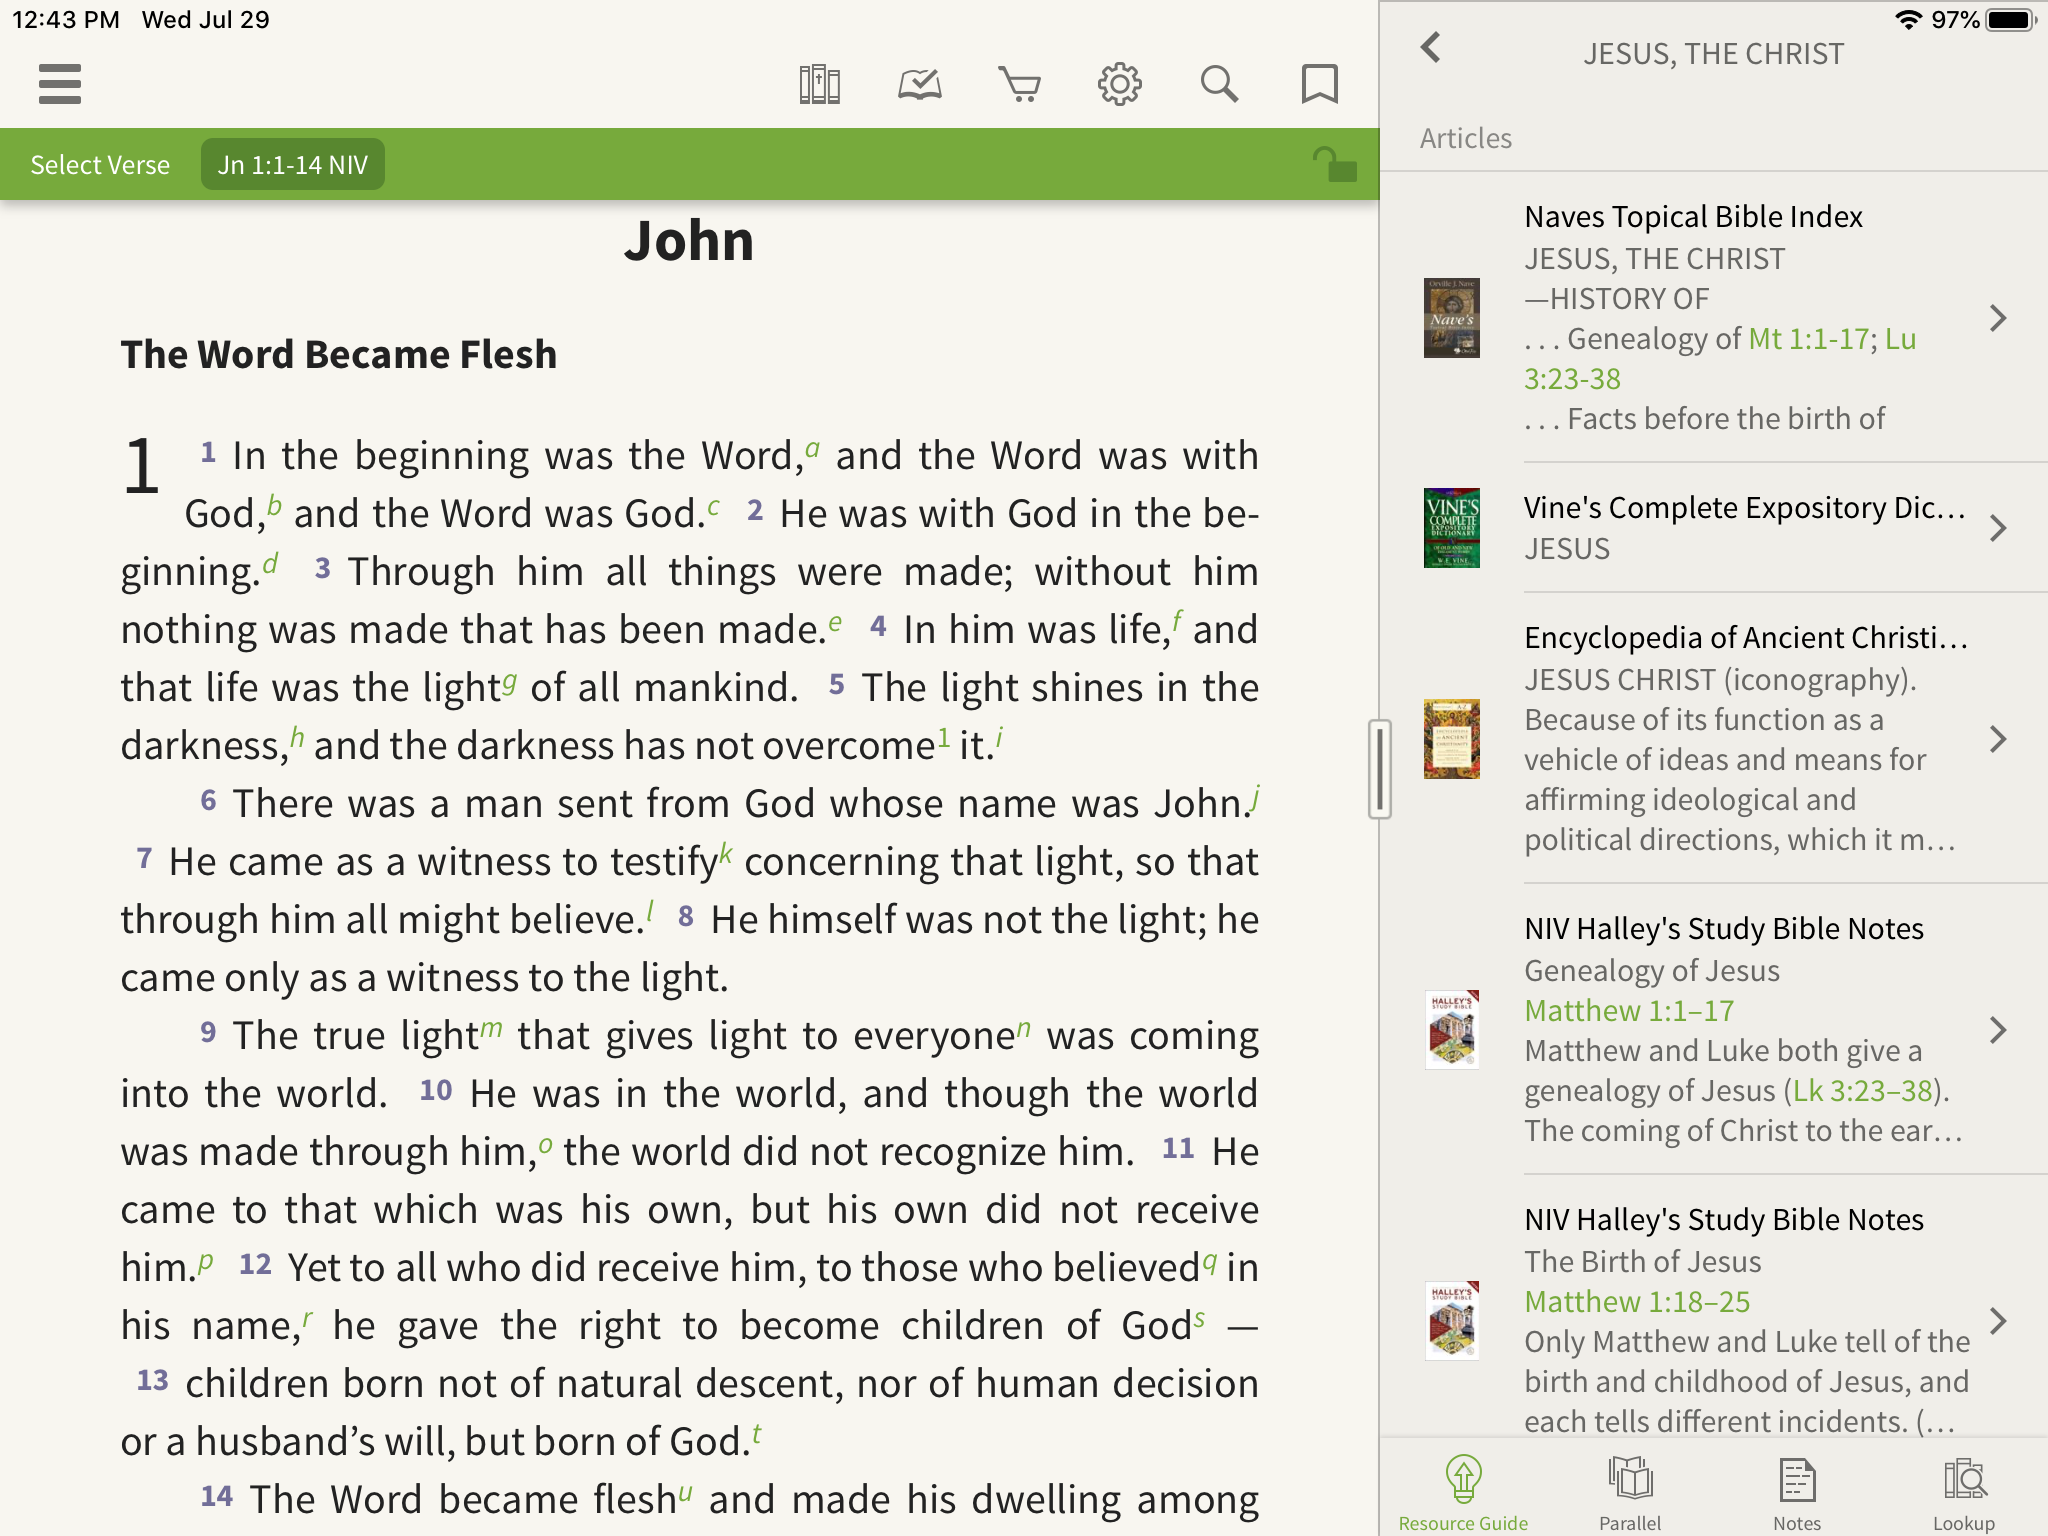 articles on Jesus in the resource guide